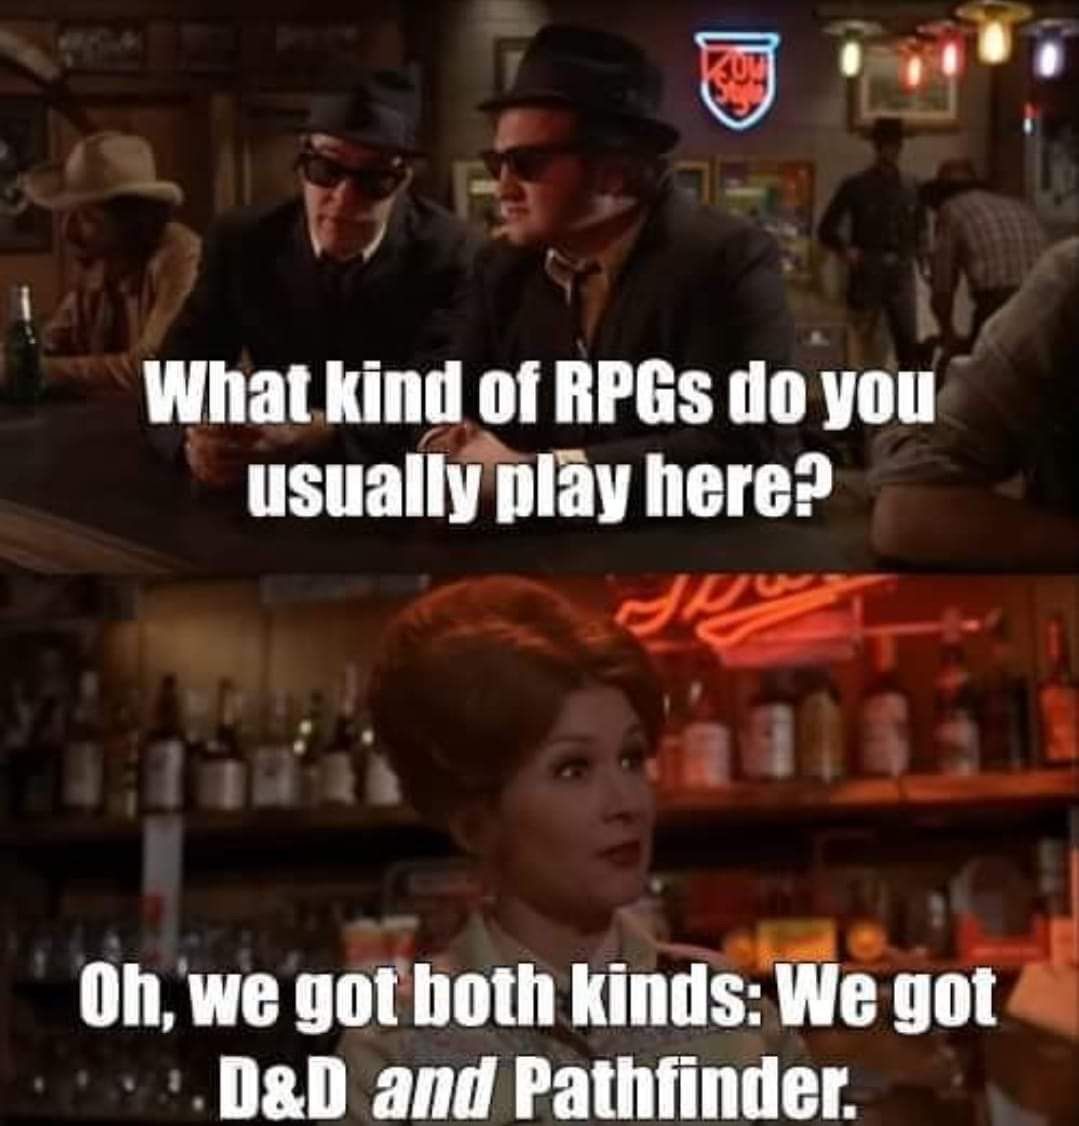 Meme of the scene from the Blues Brothers movies, where 2 gentlemen wearing sunglasses indoors ask the Bartender
"What Kind of RPGs do you usually play here?"
"Oh, we got both kinds: D&D and Pathfinder!"